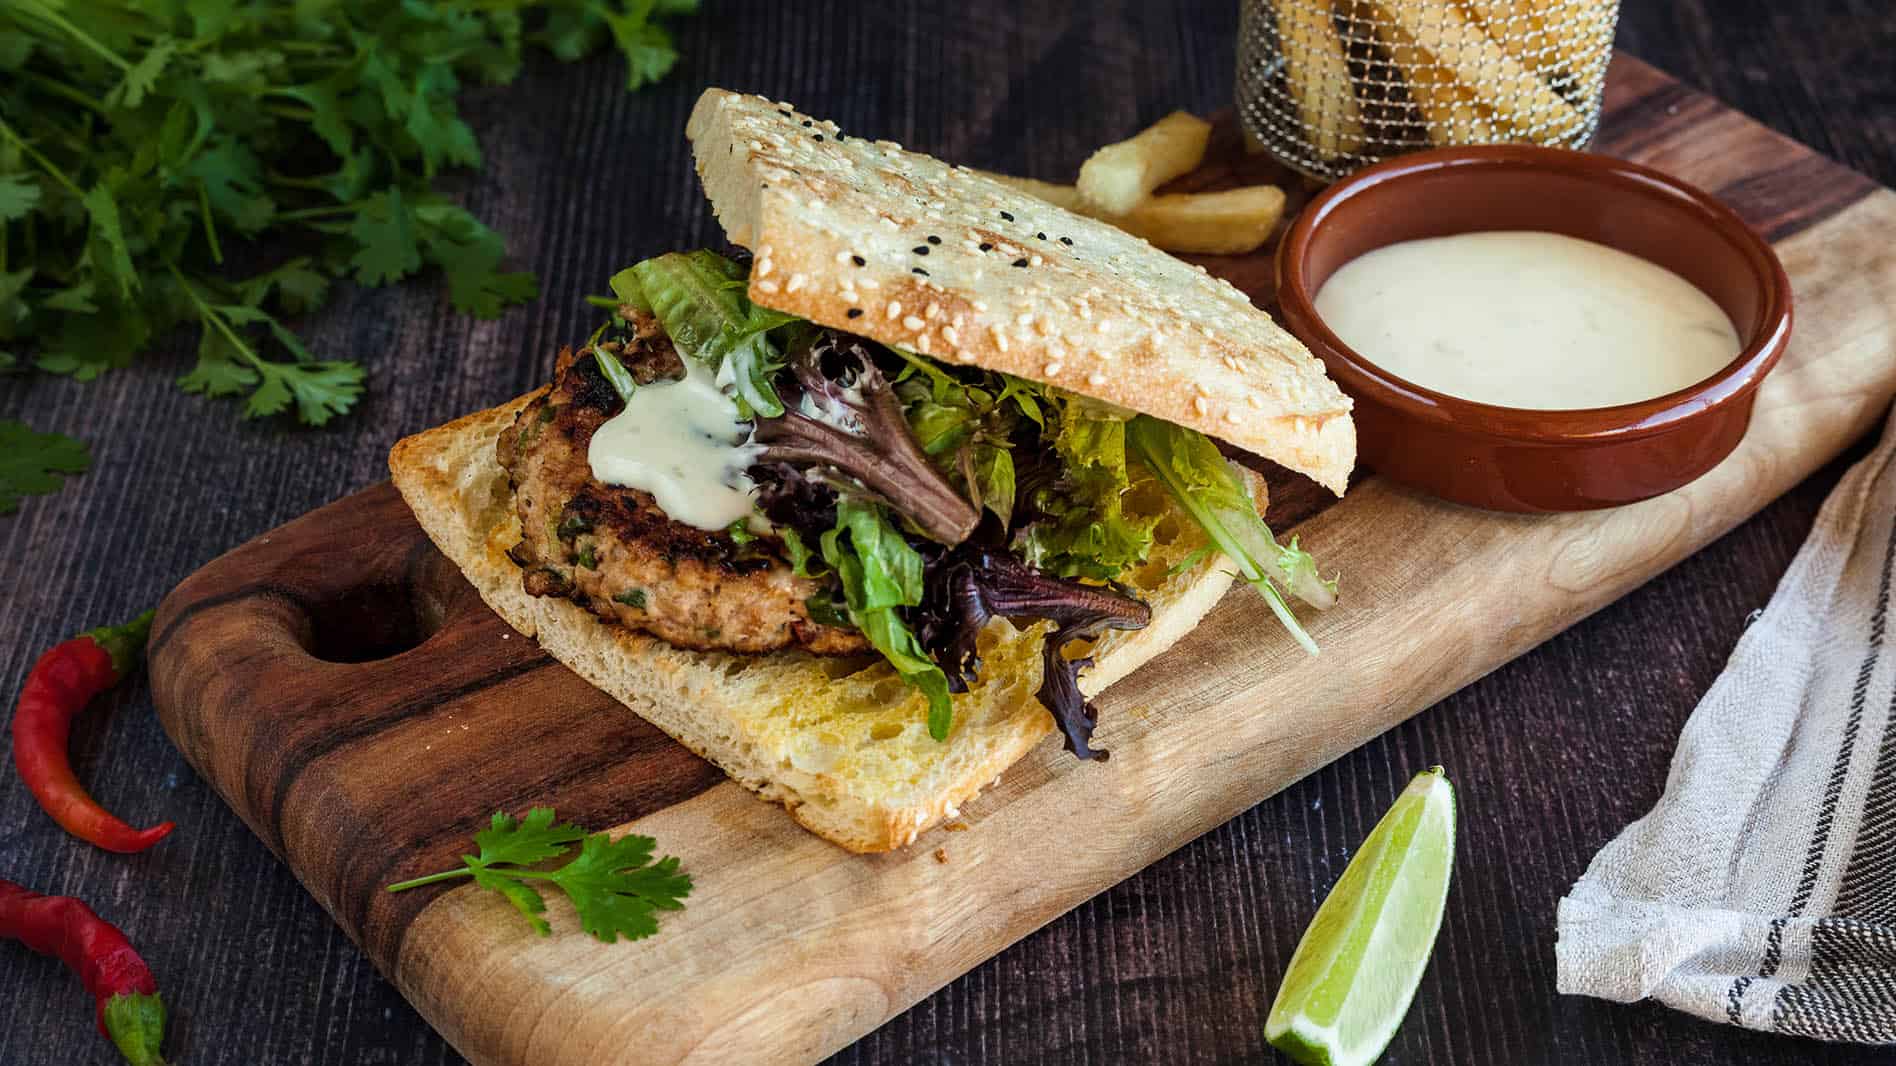 Coriander and Chilli Infused Chicken Burger with Lime Mayonnaise